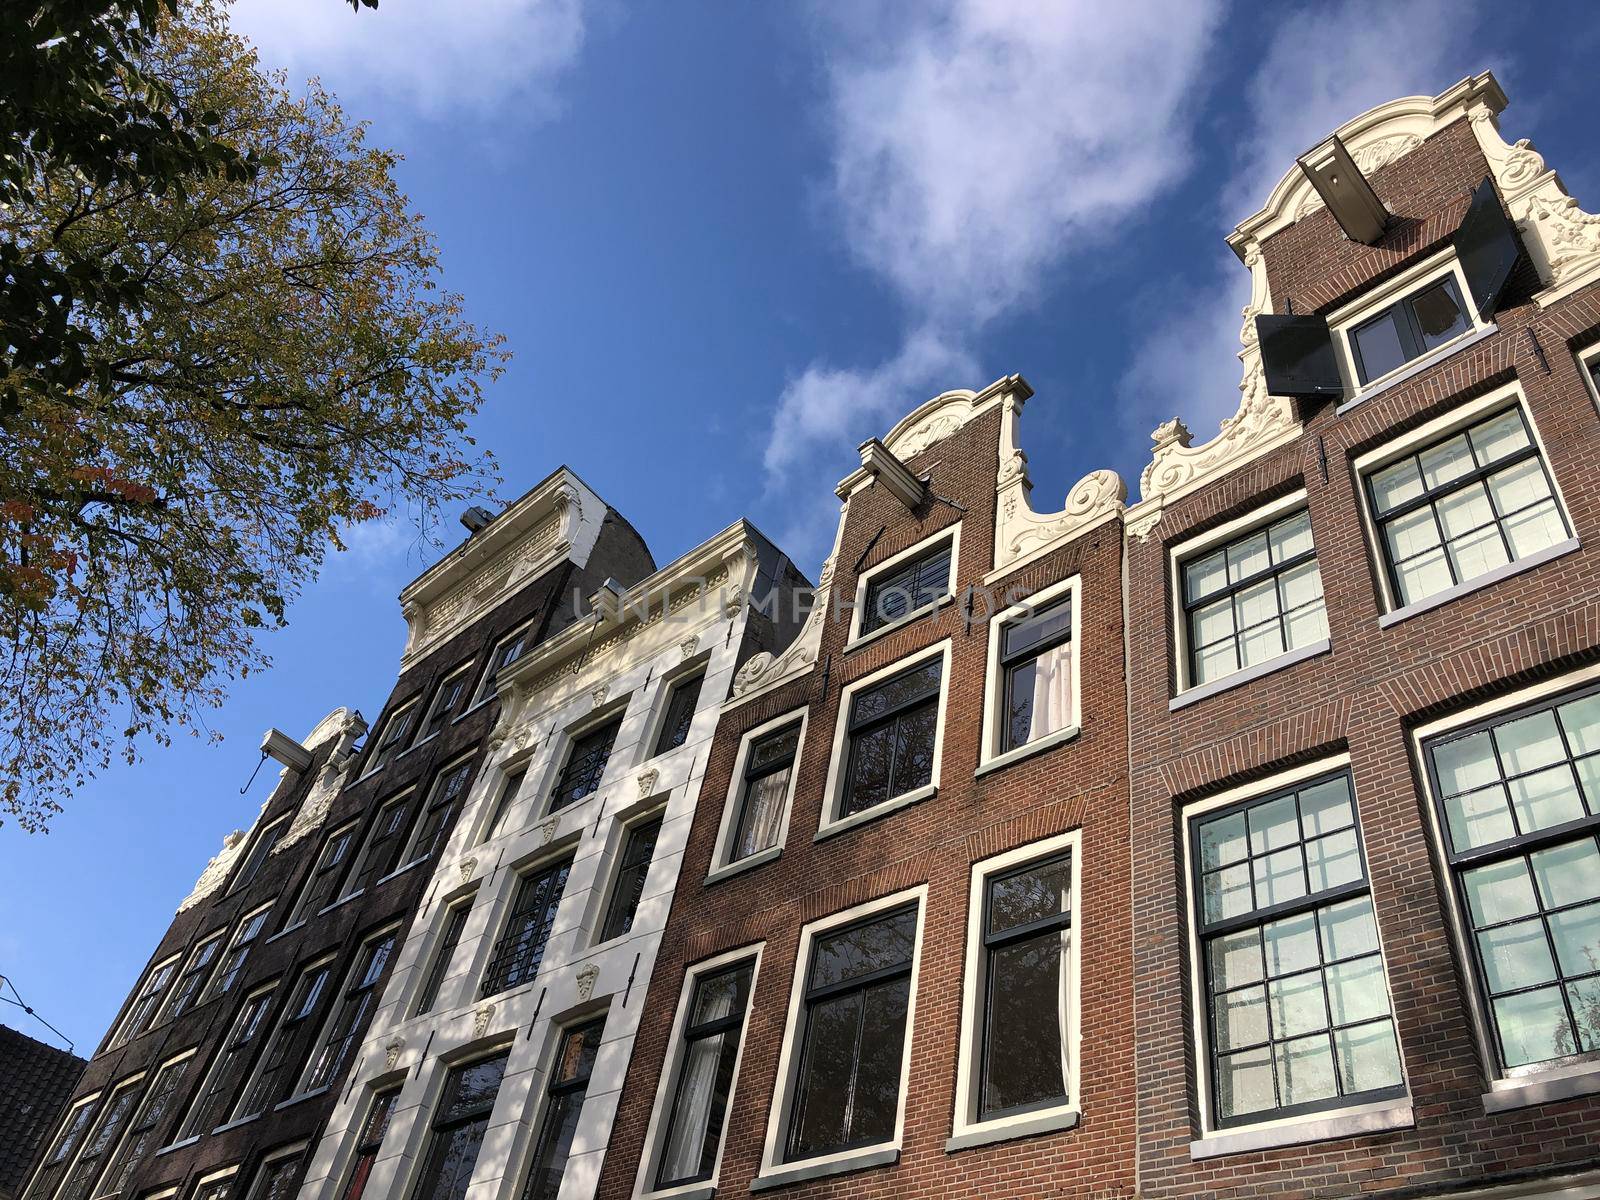 Architecture in Amsterdam, The Netherlands 